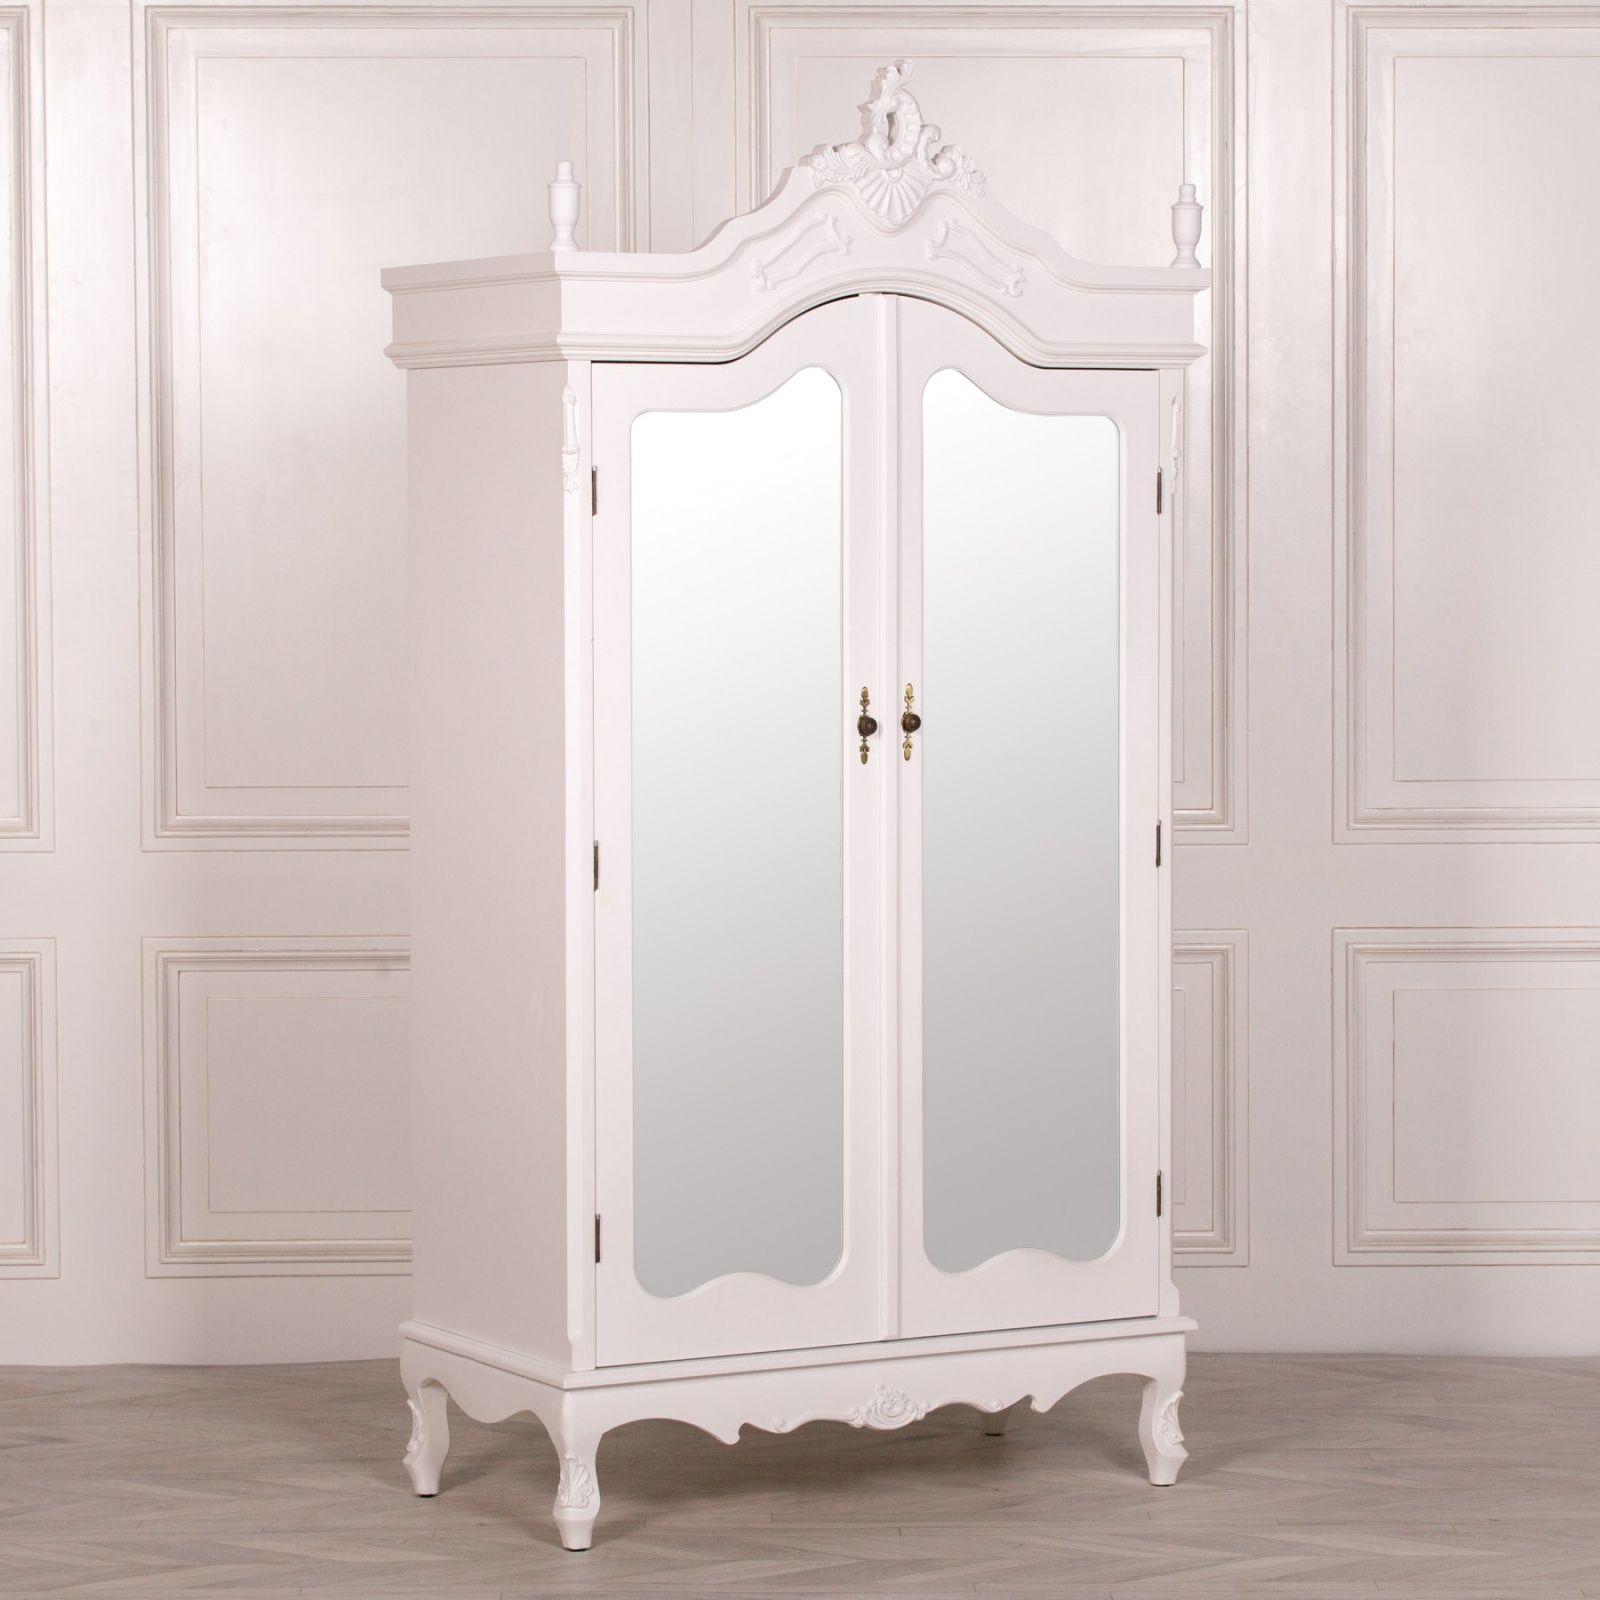 French Style Wardrobe White Mirrored Double Armoire Inside Single White Wardrobes With Mirror (View 12 of 15)